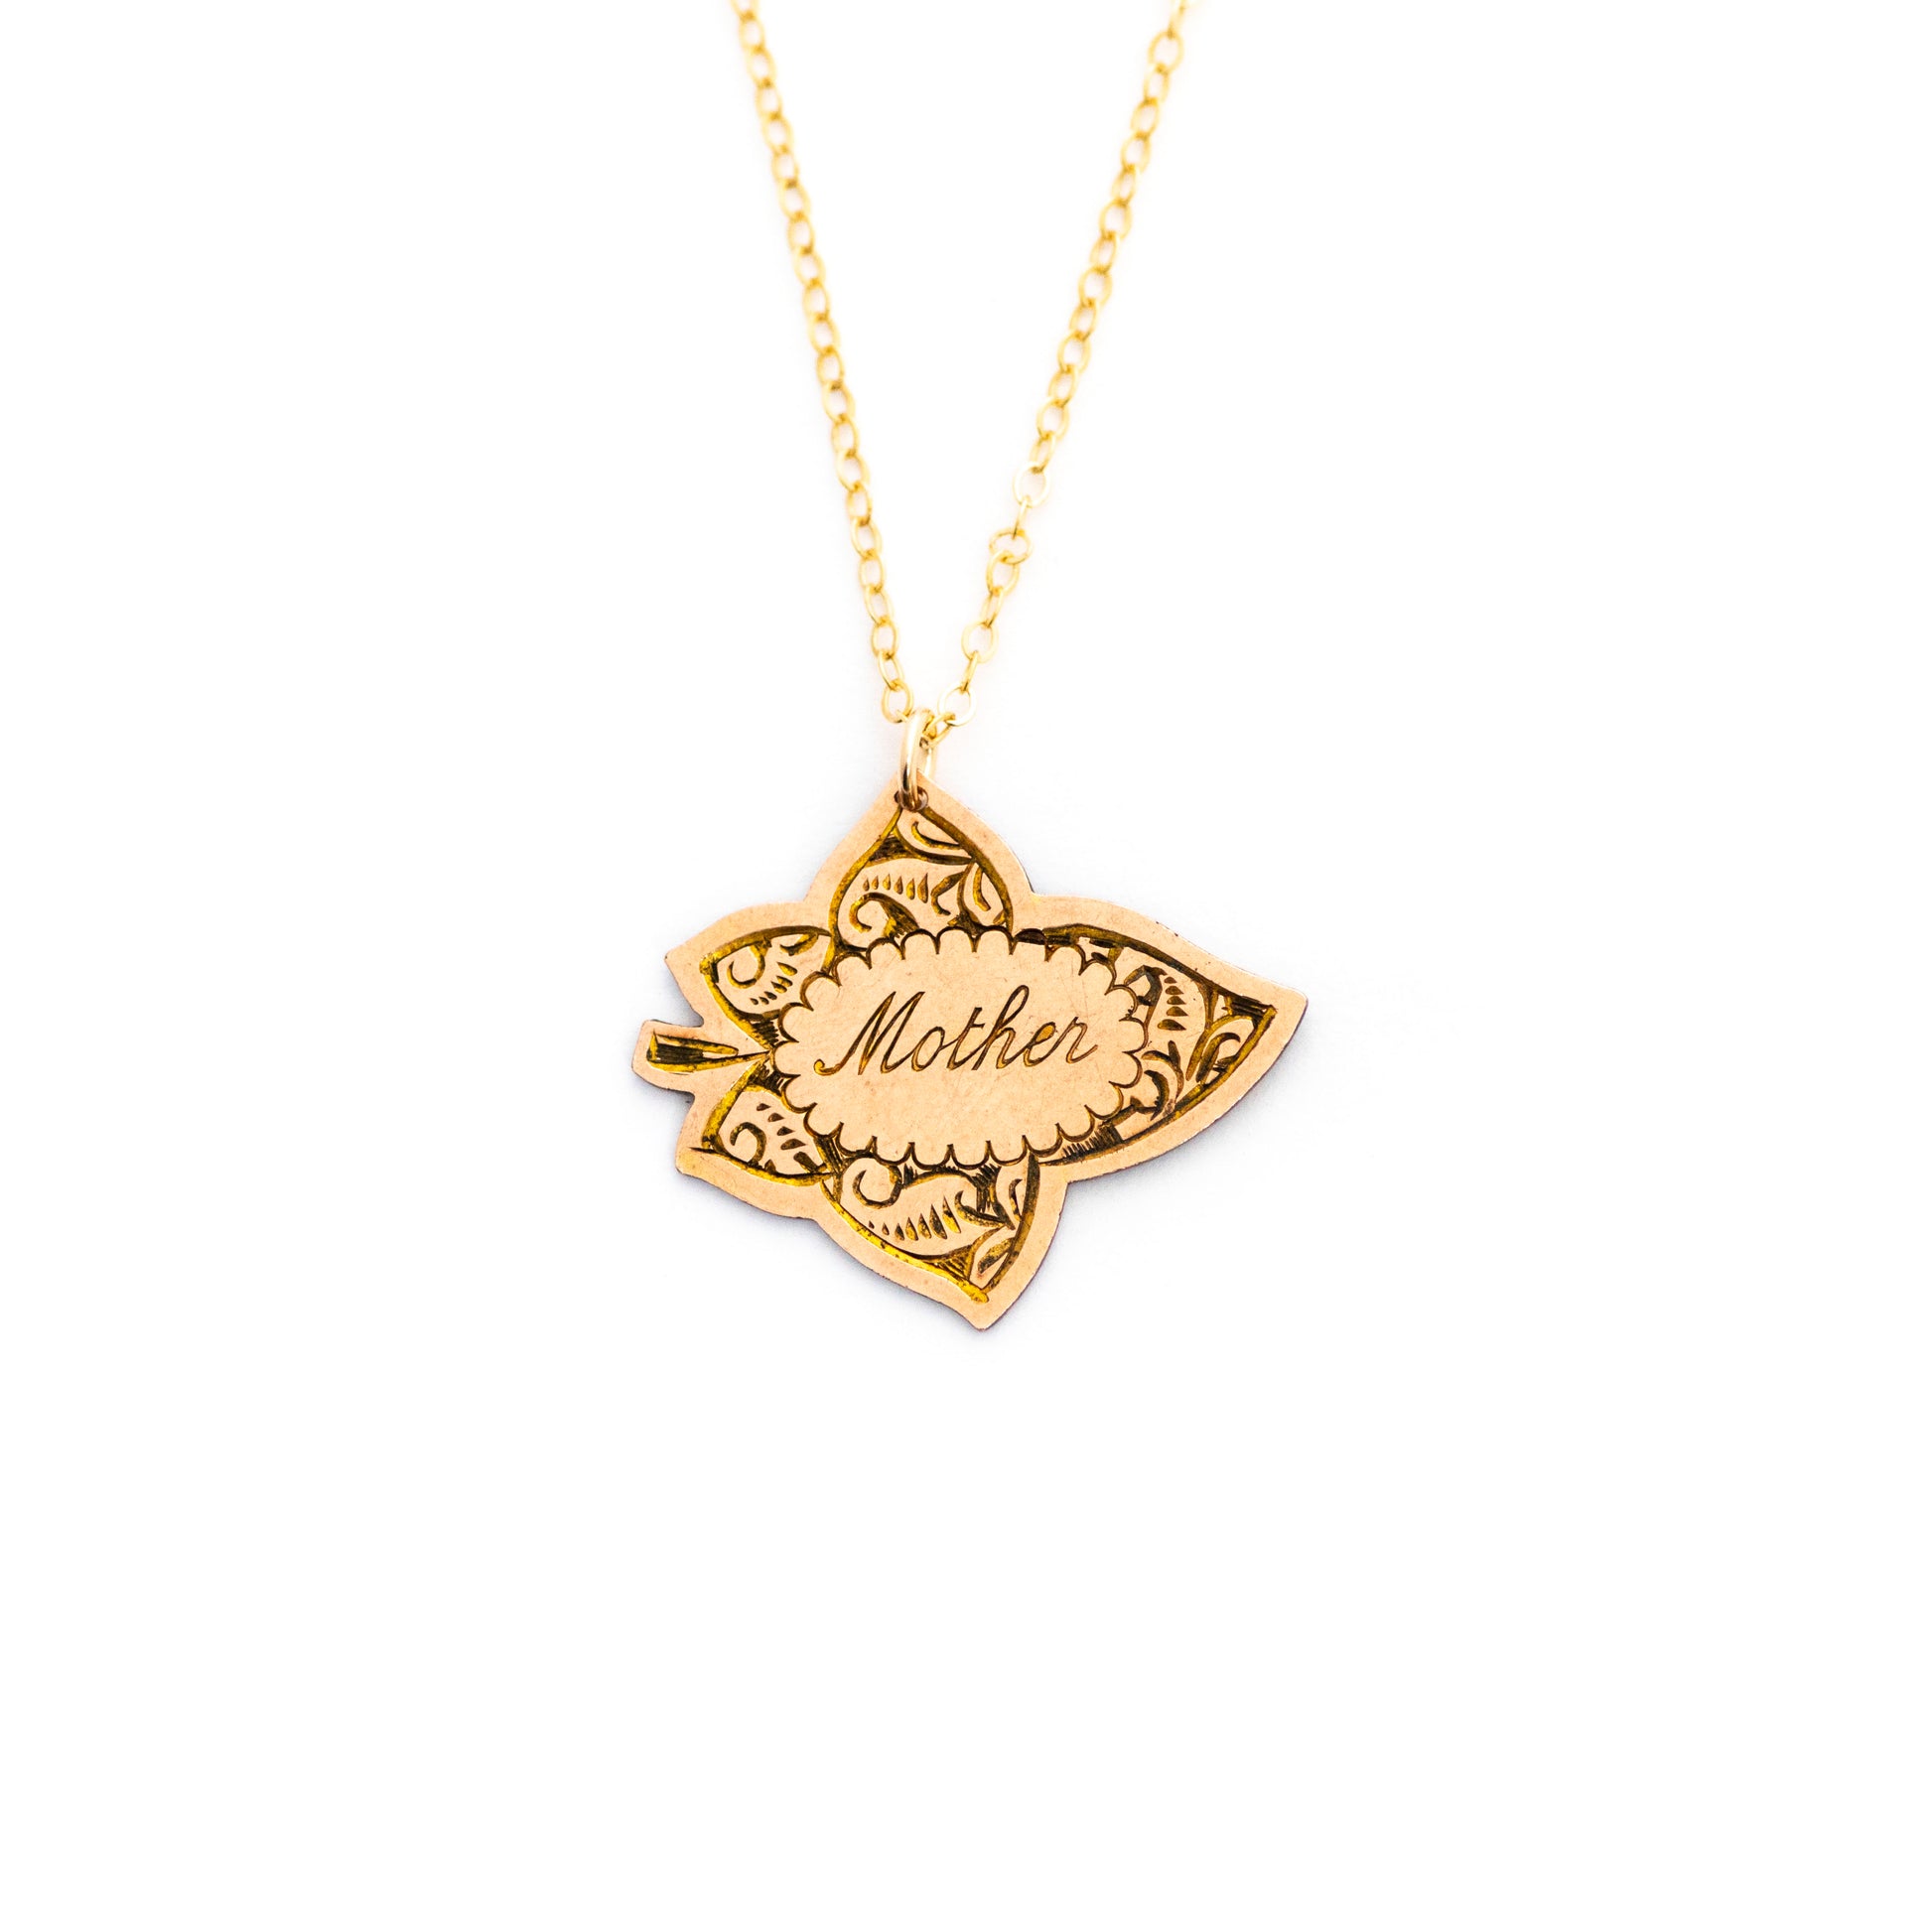 This antique conversion necklace is made up of:  Gold filled Victorian brooch pendant from the late 1800s with hand tooled details. Pendant is in the shape of a leaf and engraved with the word "Mother". 